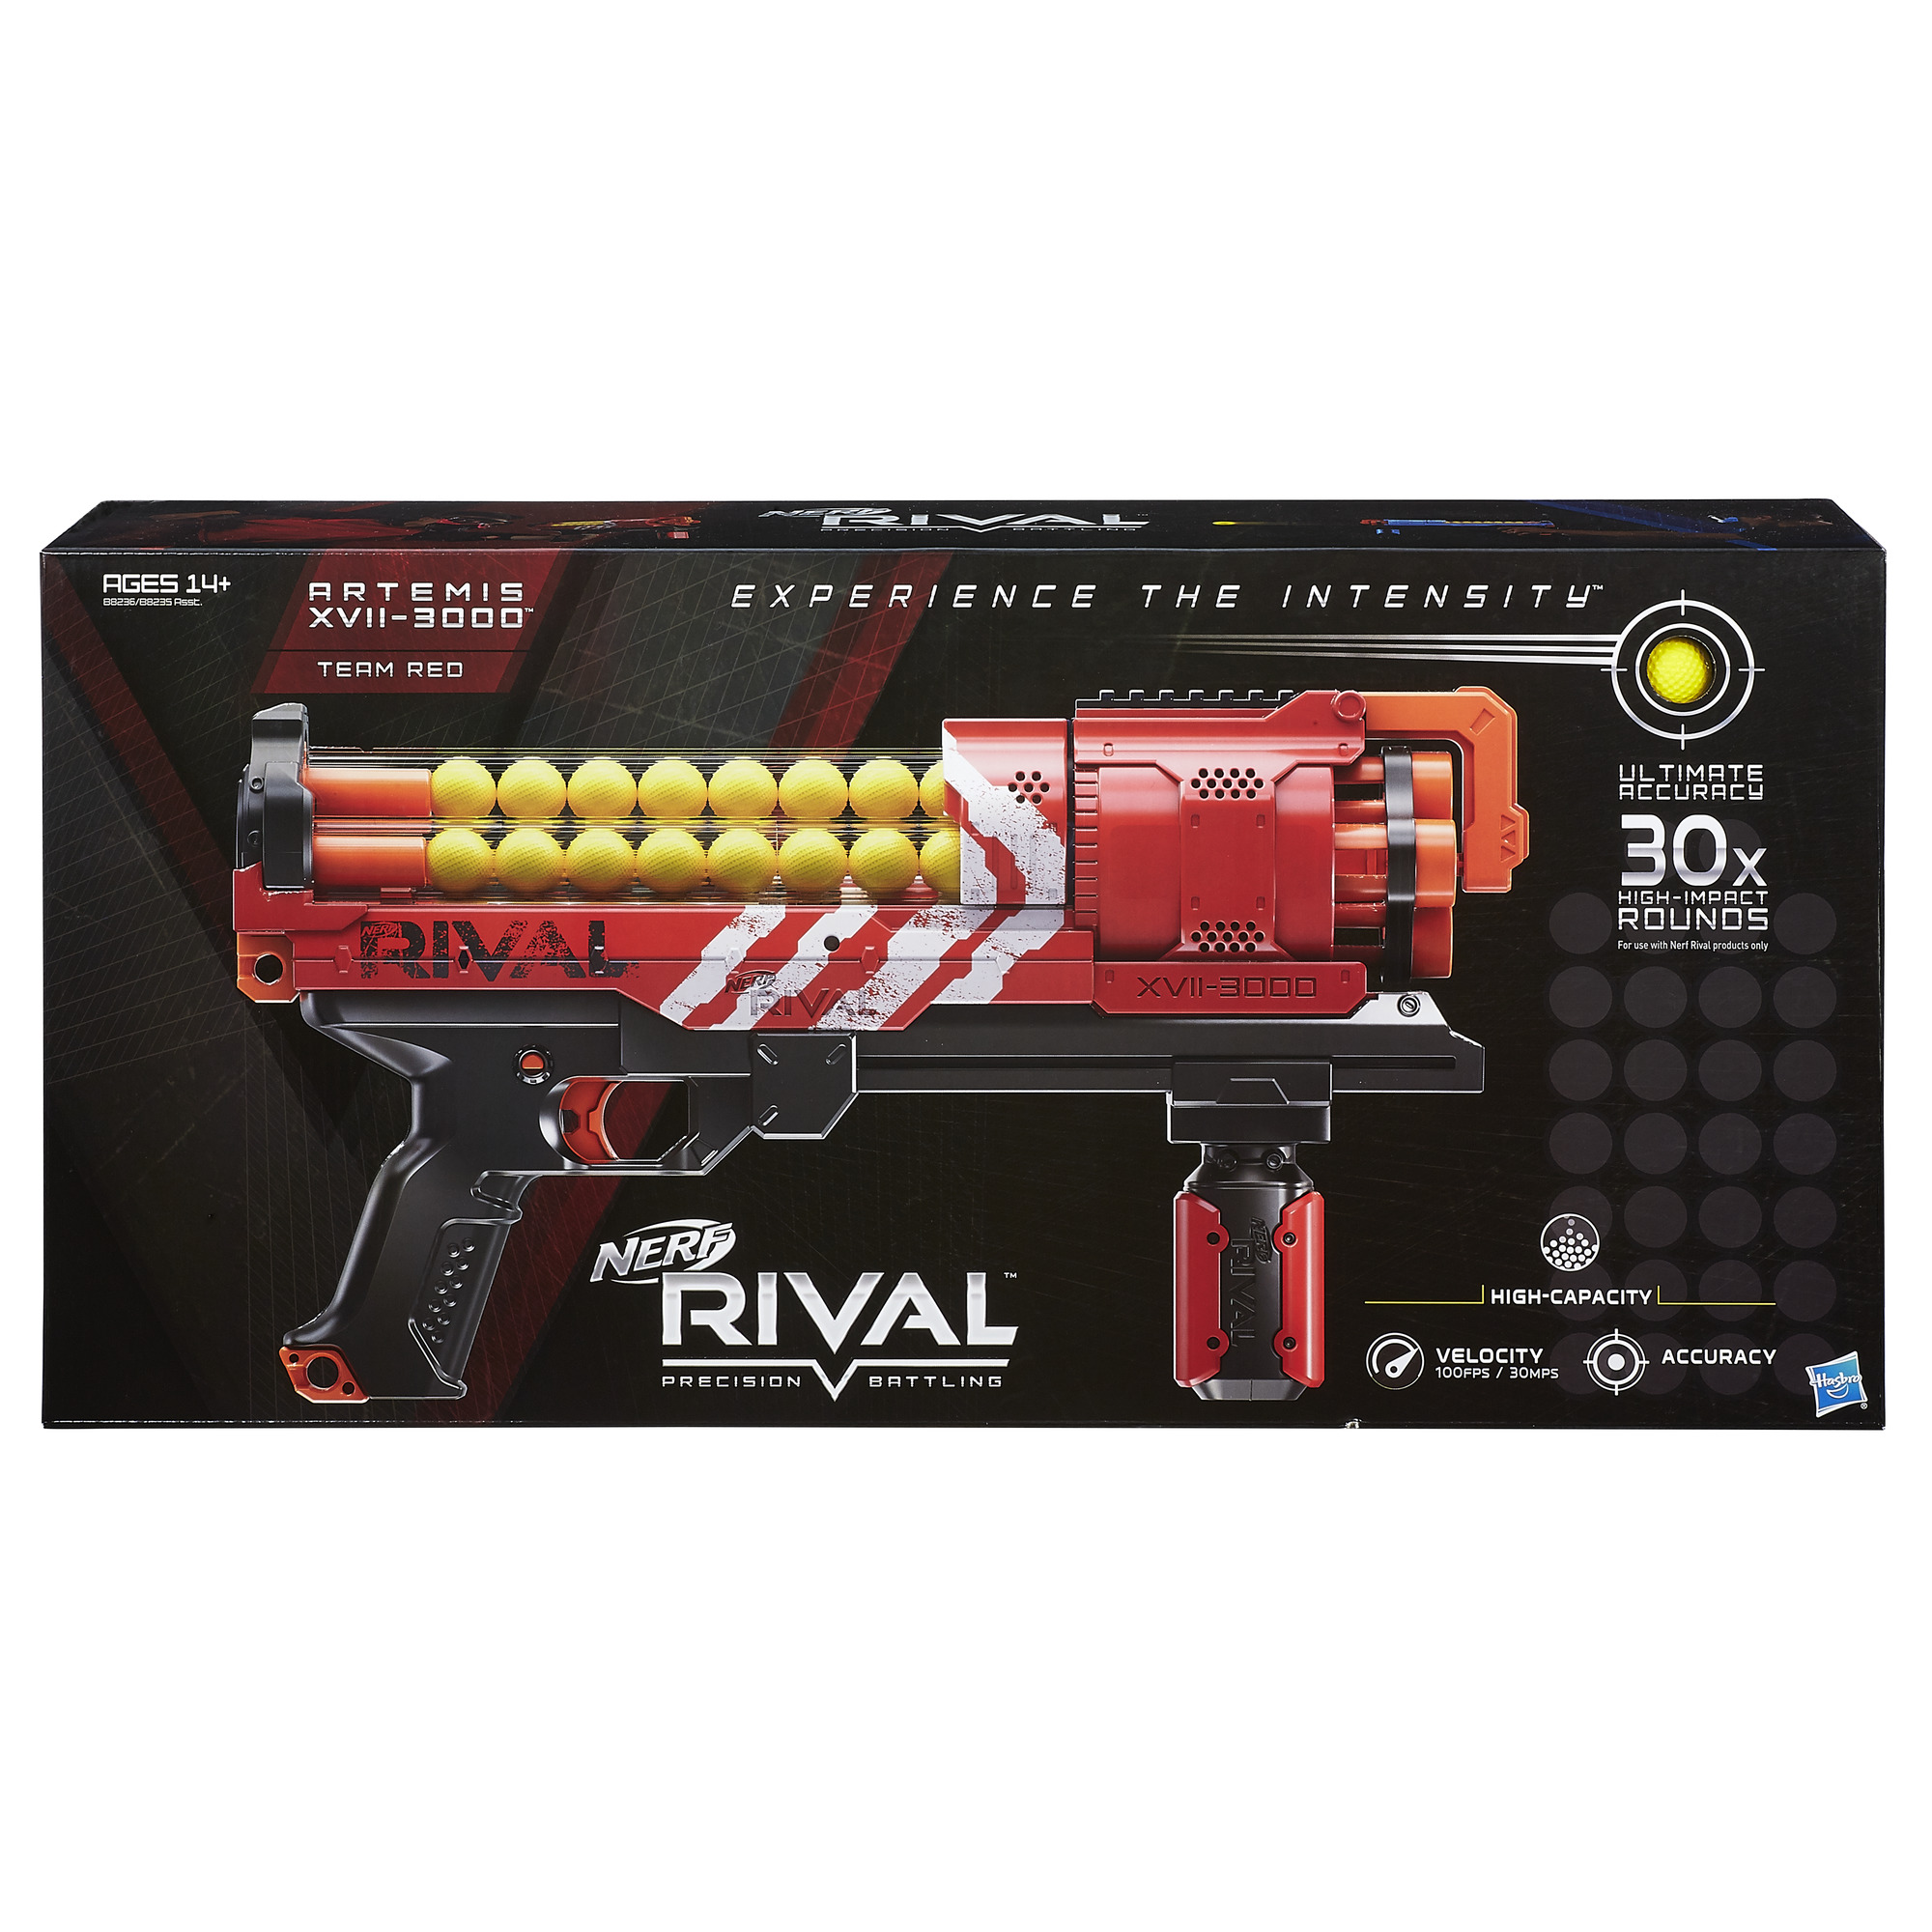 Nerf Rival Artemis XVII 3000 (Red), includes Blaster and 30 Rounds - image 2 of 2